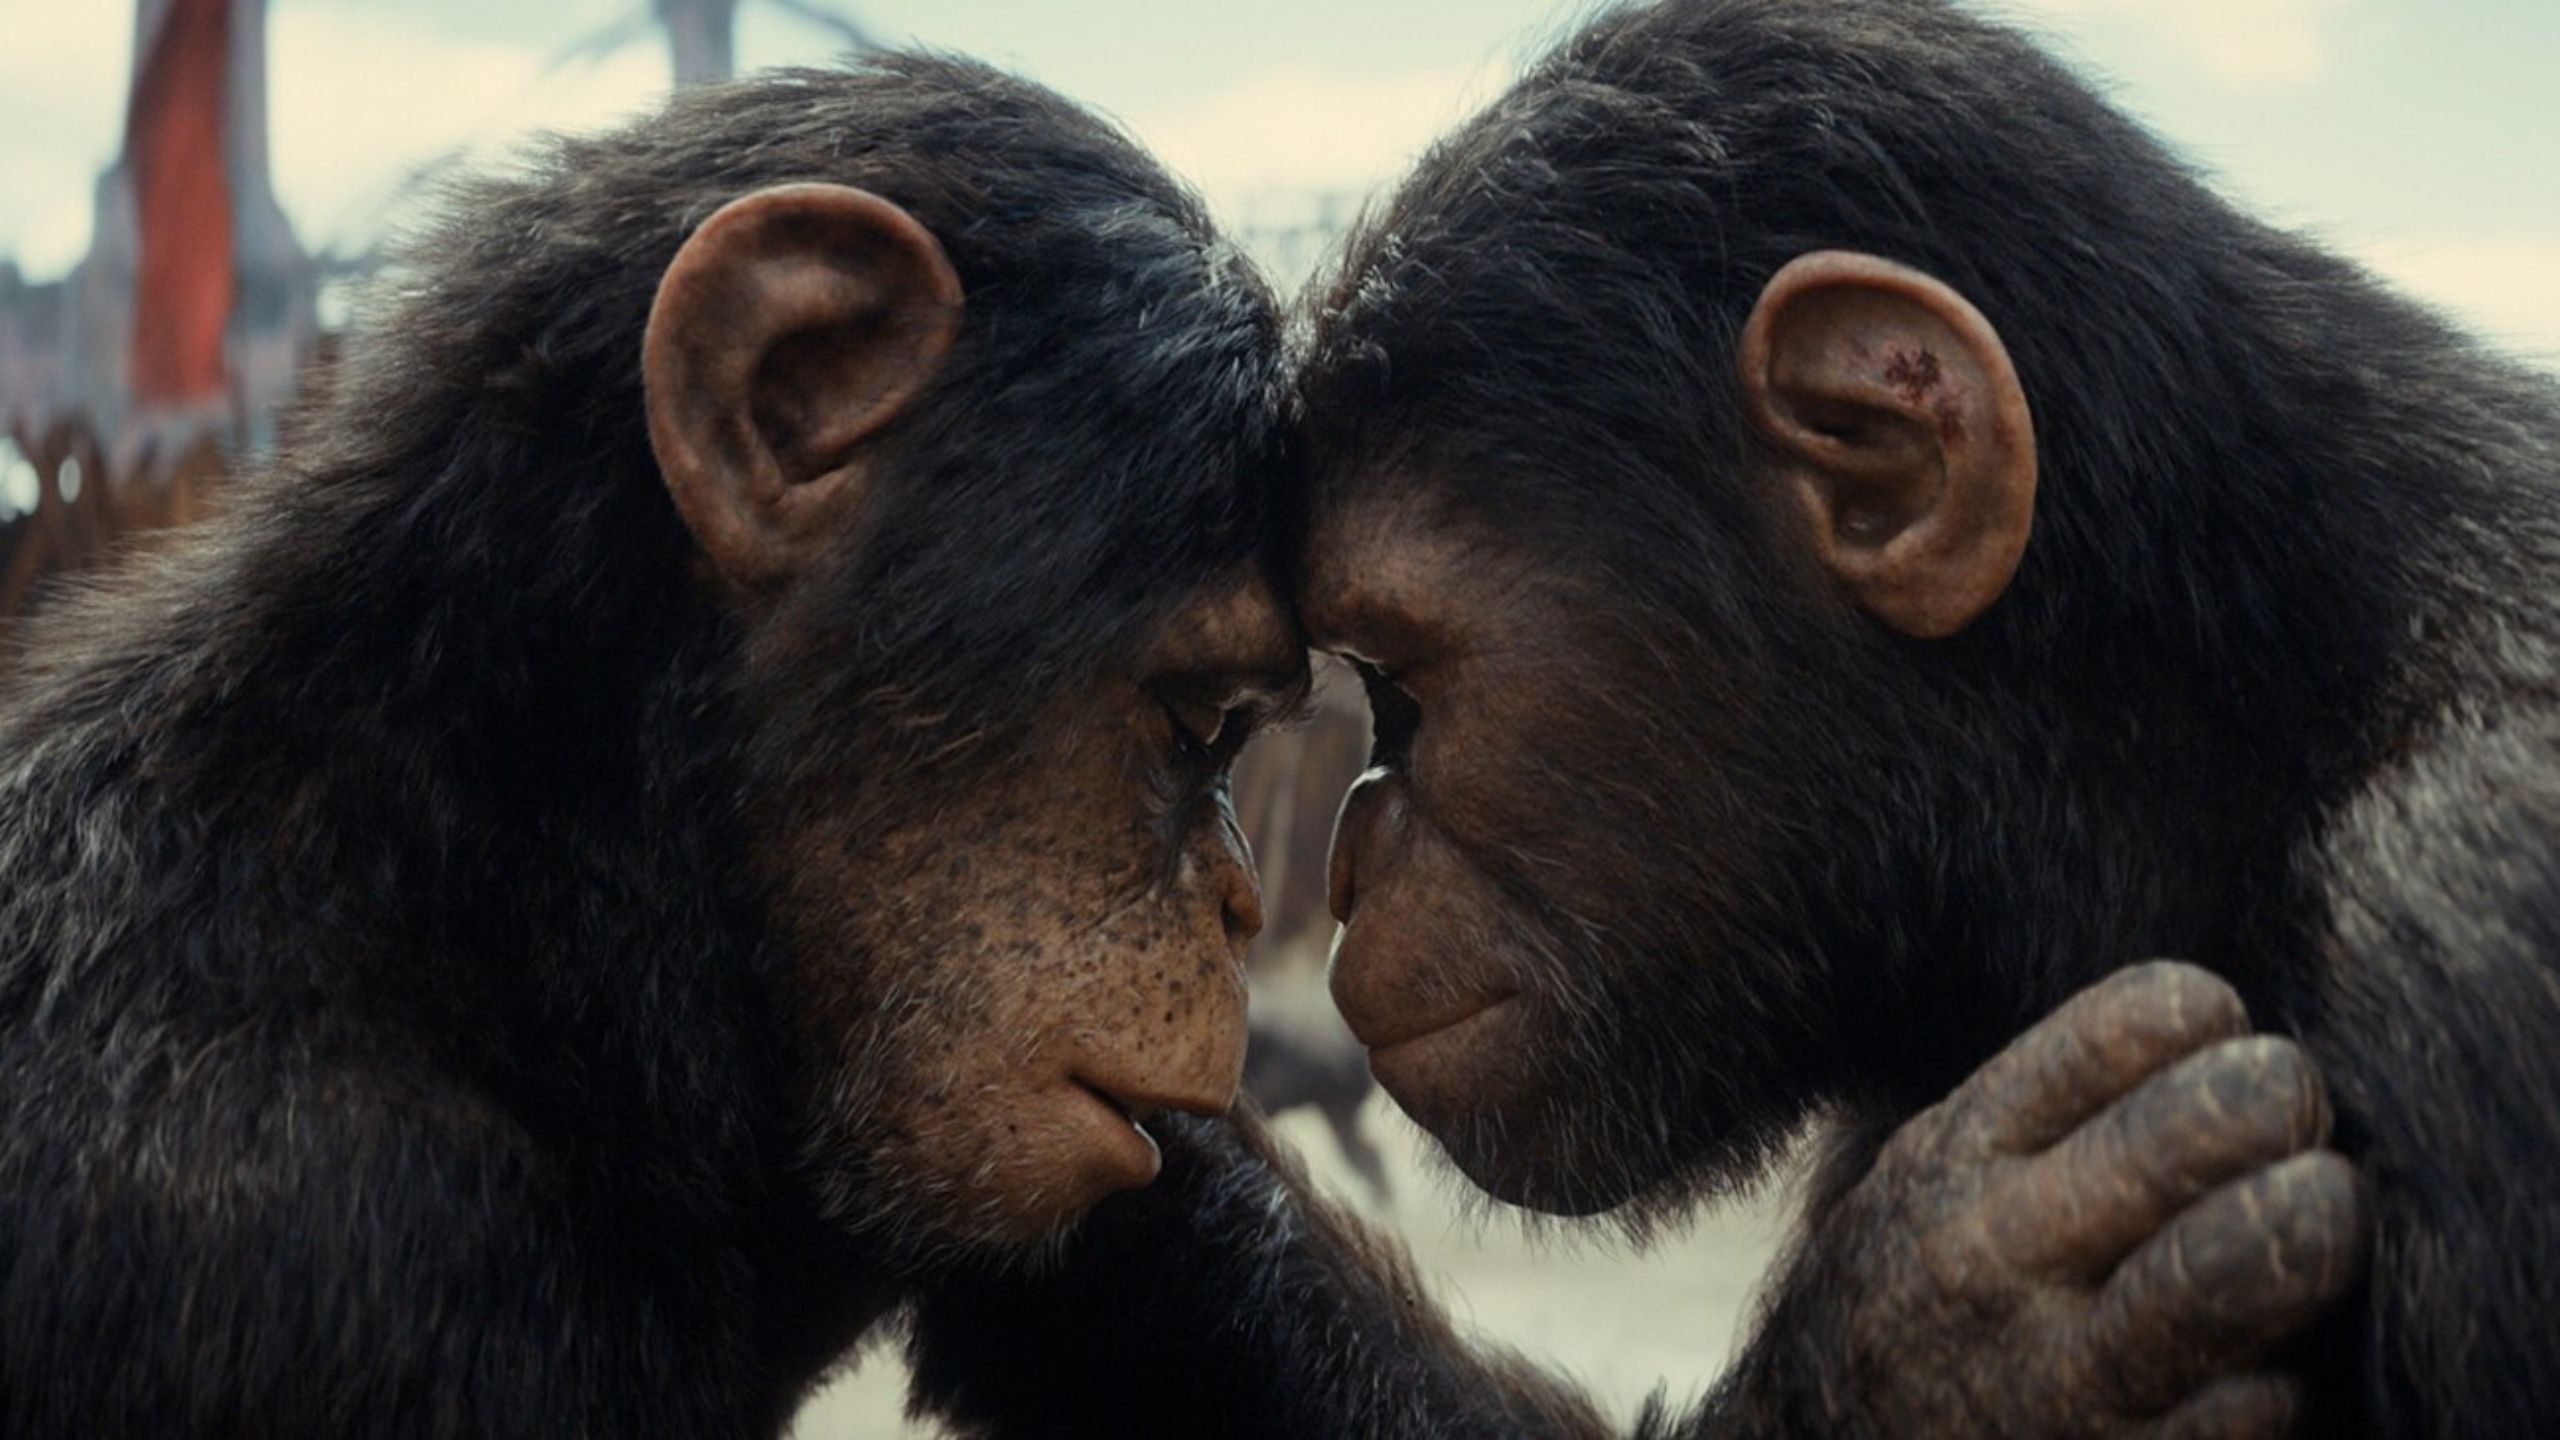 Soona and Noa embracing in Kingdom of the Planet of the Apes